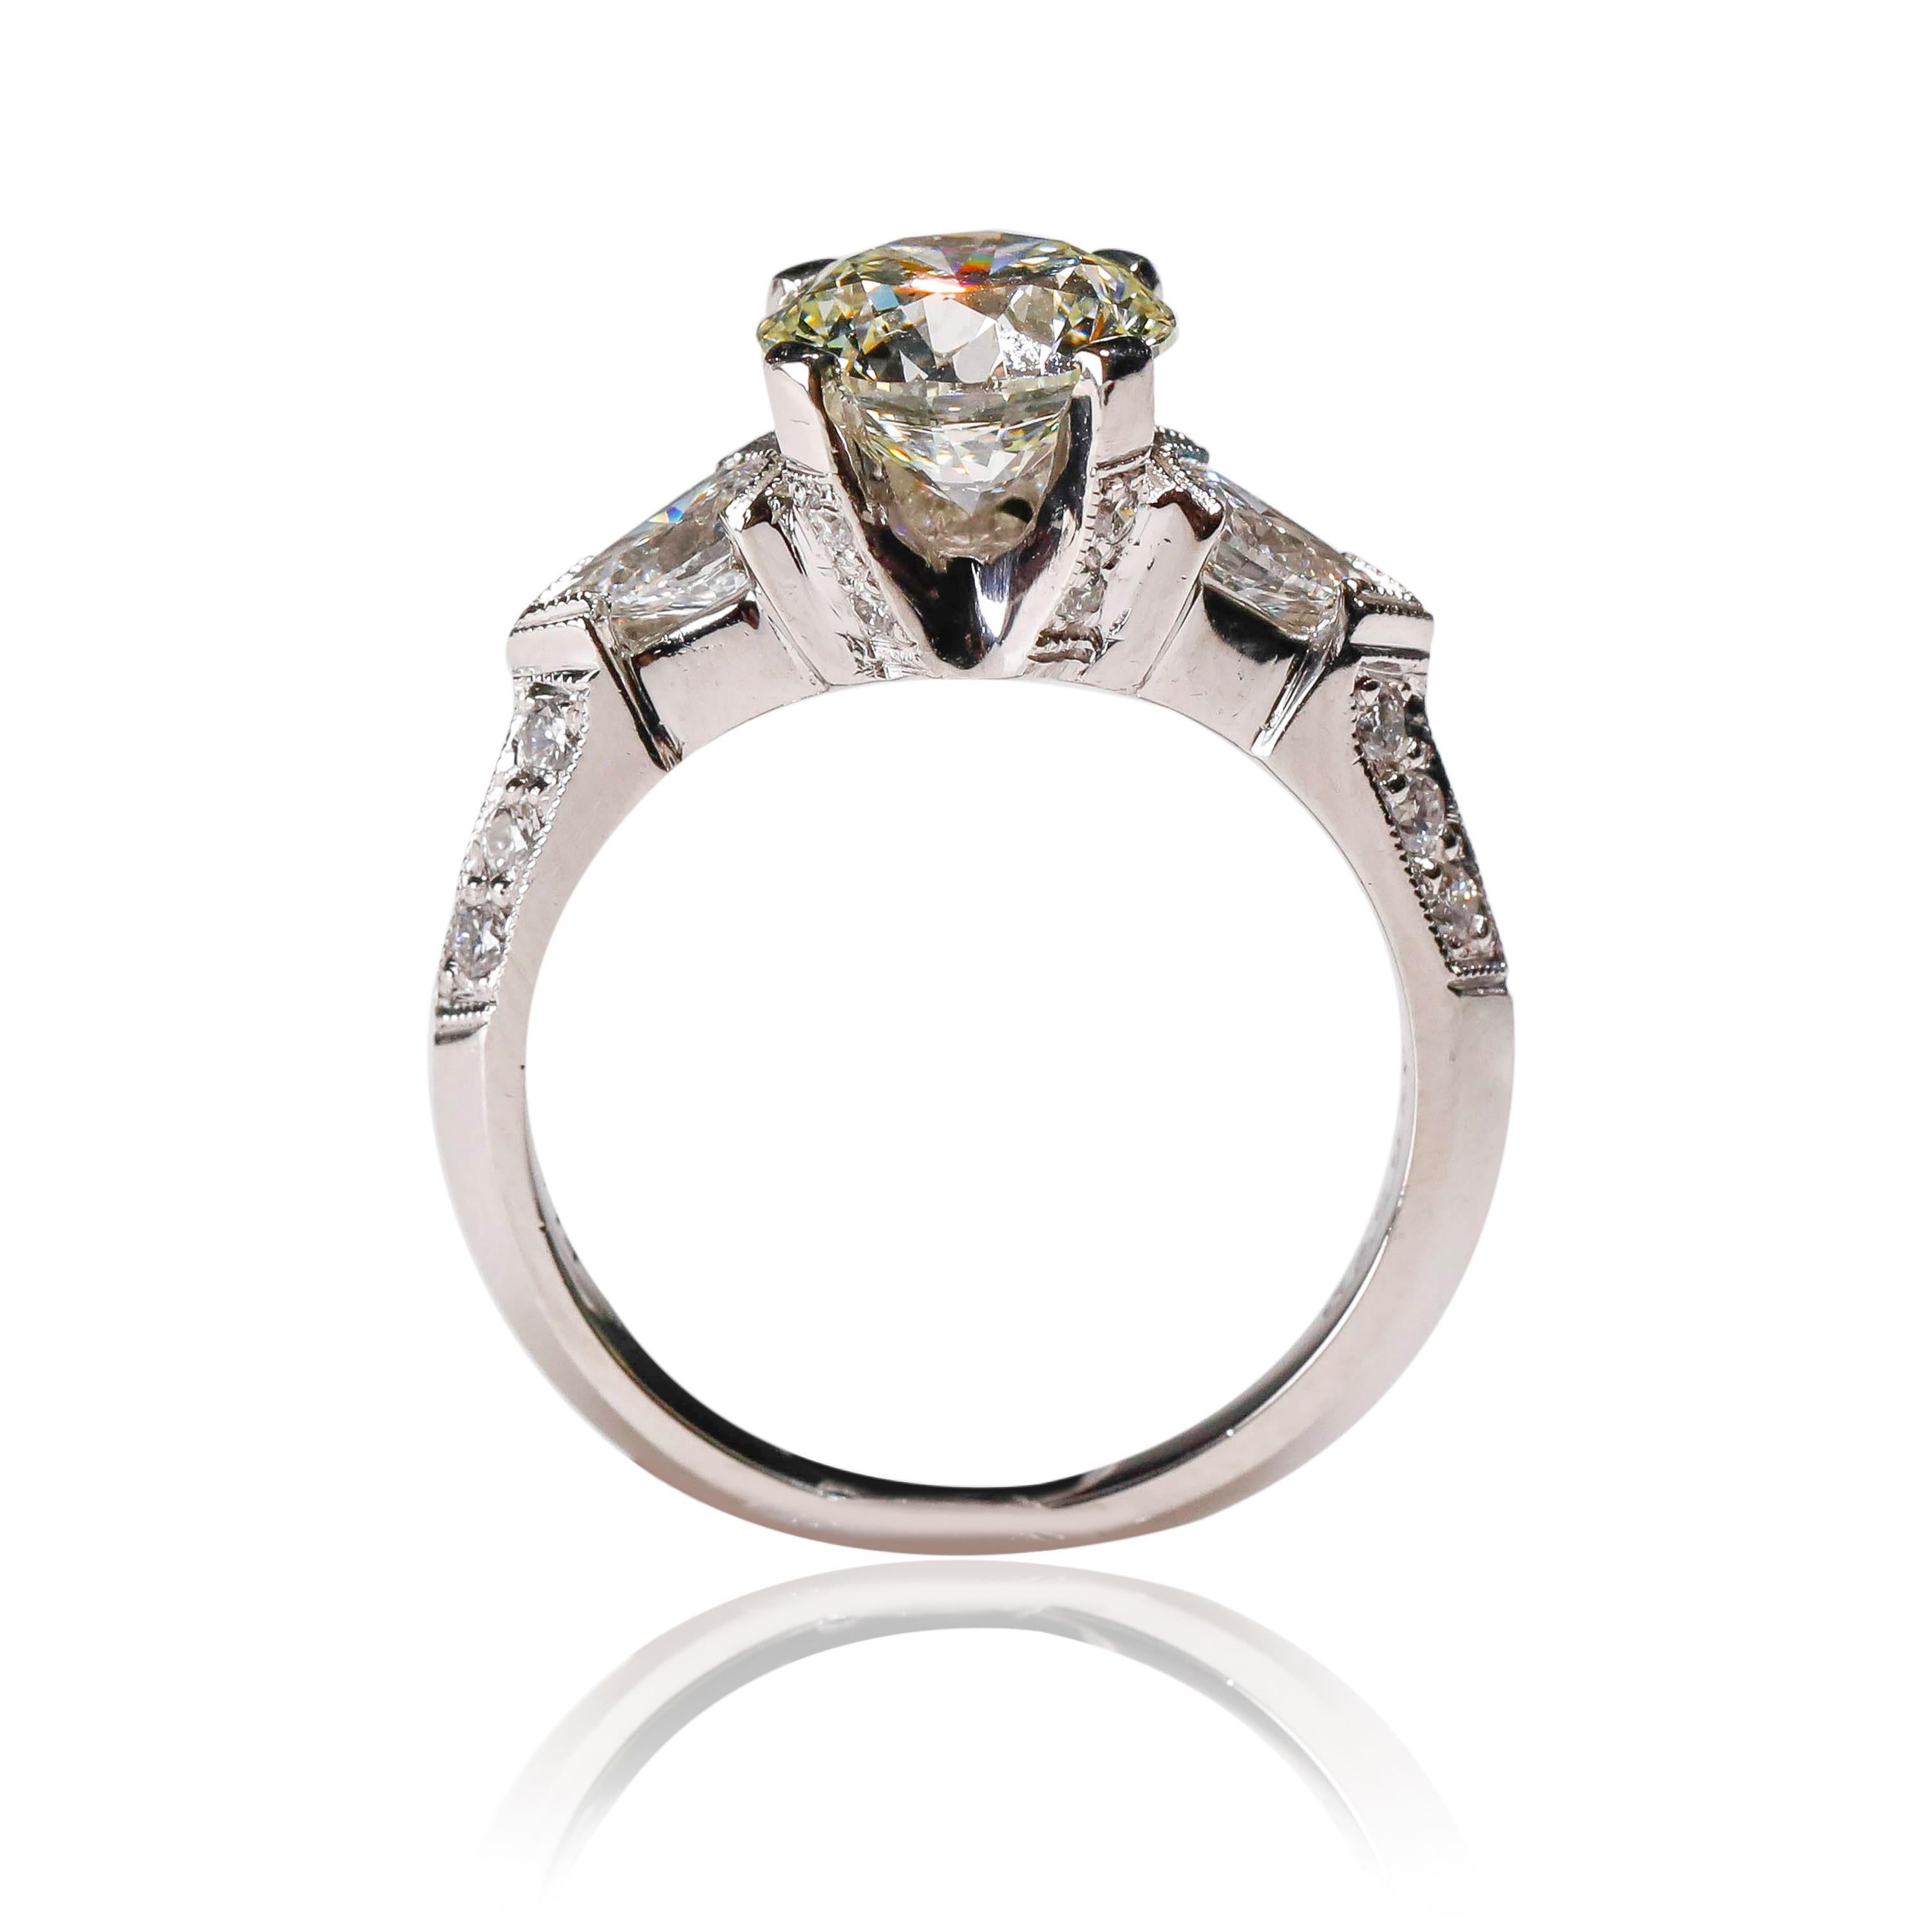 Tacori Platinum 3 Carat Round Pear Shape Diamond Wedding Ring

Luxurious in every way, this ring is a stunning example of how you should feel wearing it. Features 0.83 ct shimmering diamonds aligned together in 2.17 TCW of a center diamond in